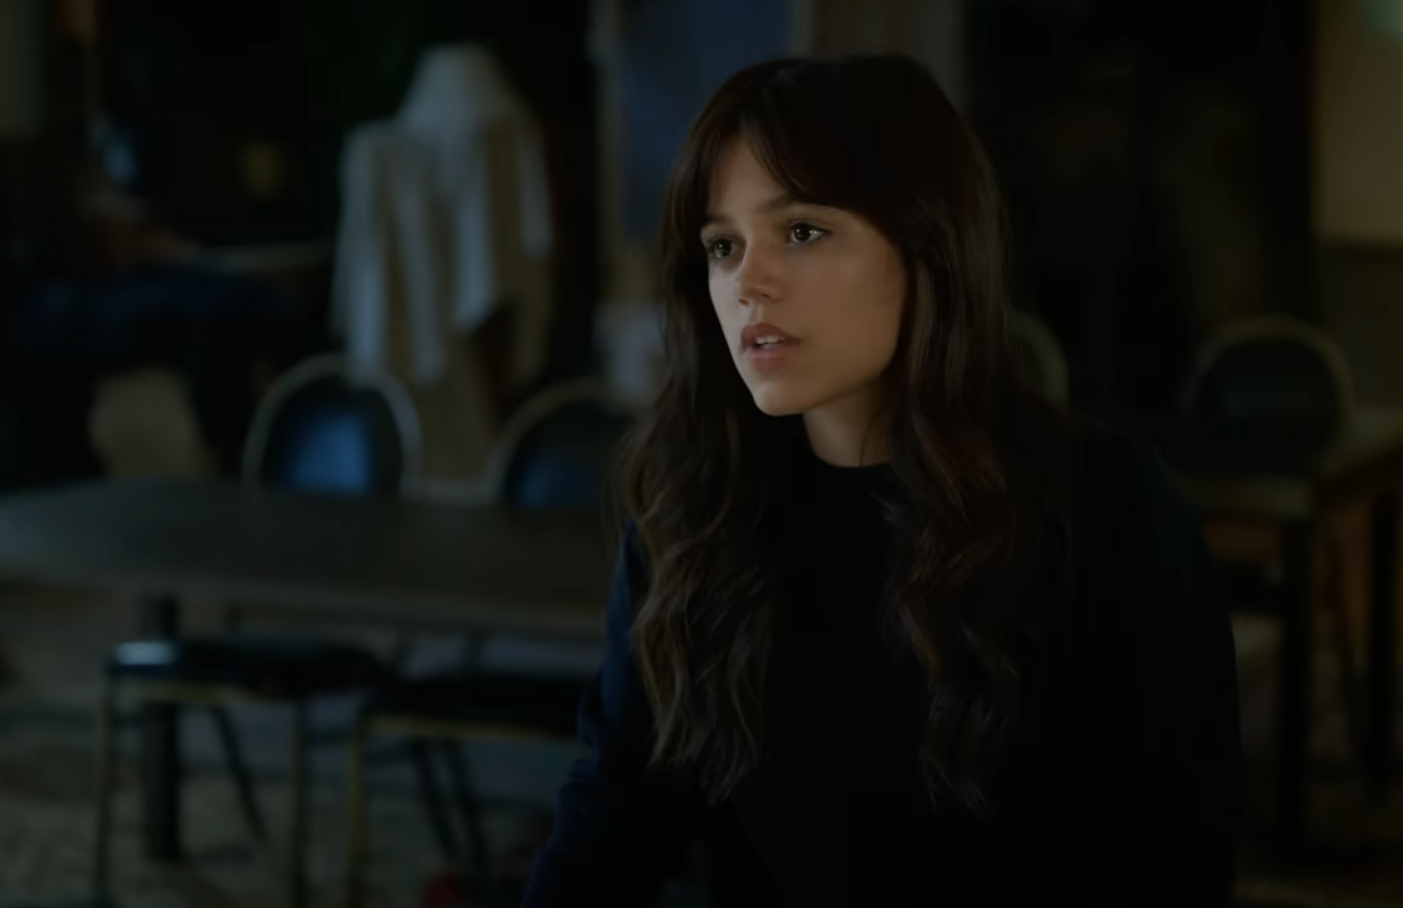 Jenna wearing a sweater, sitting, looks concerned in a scene from the film